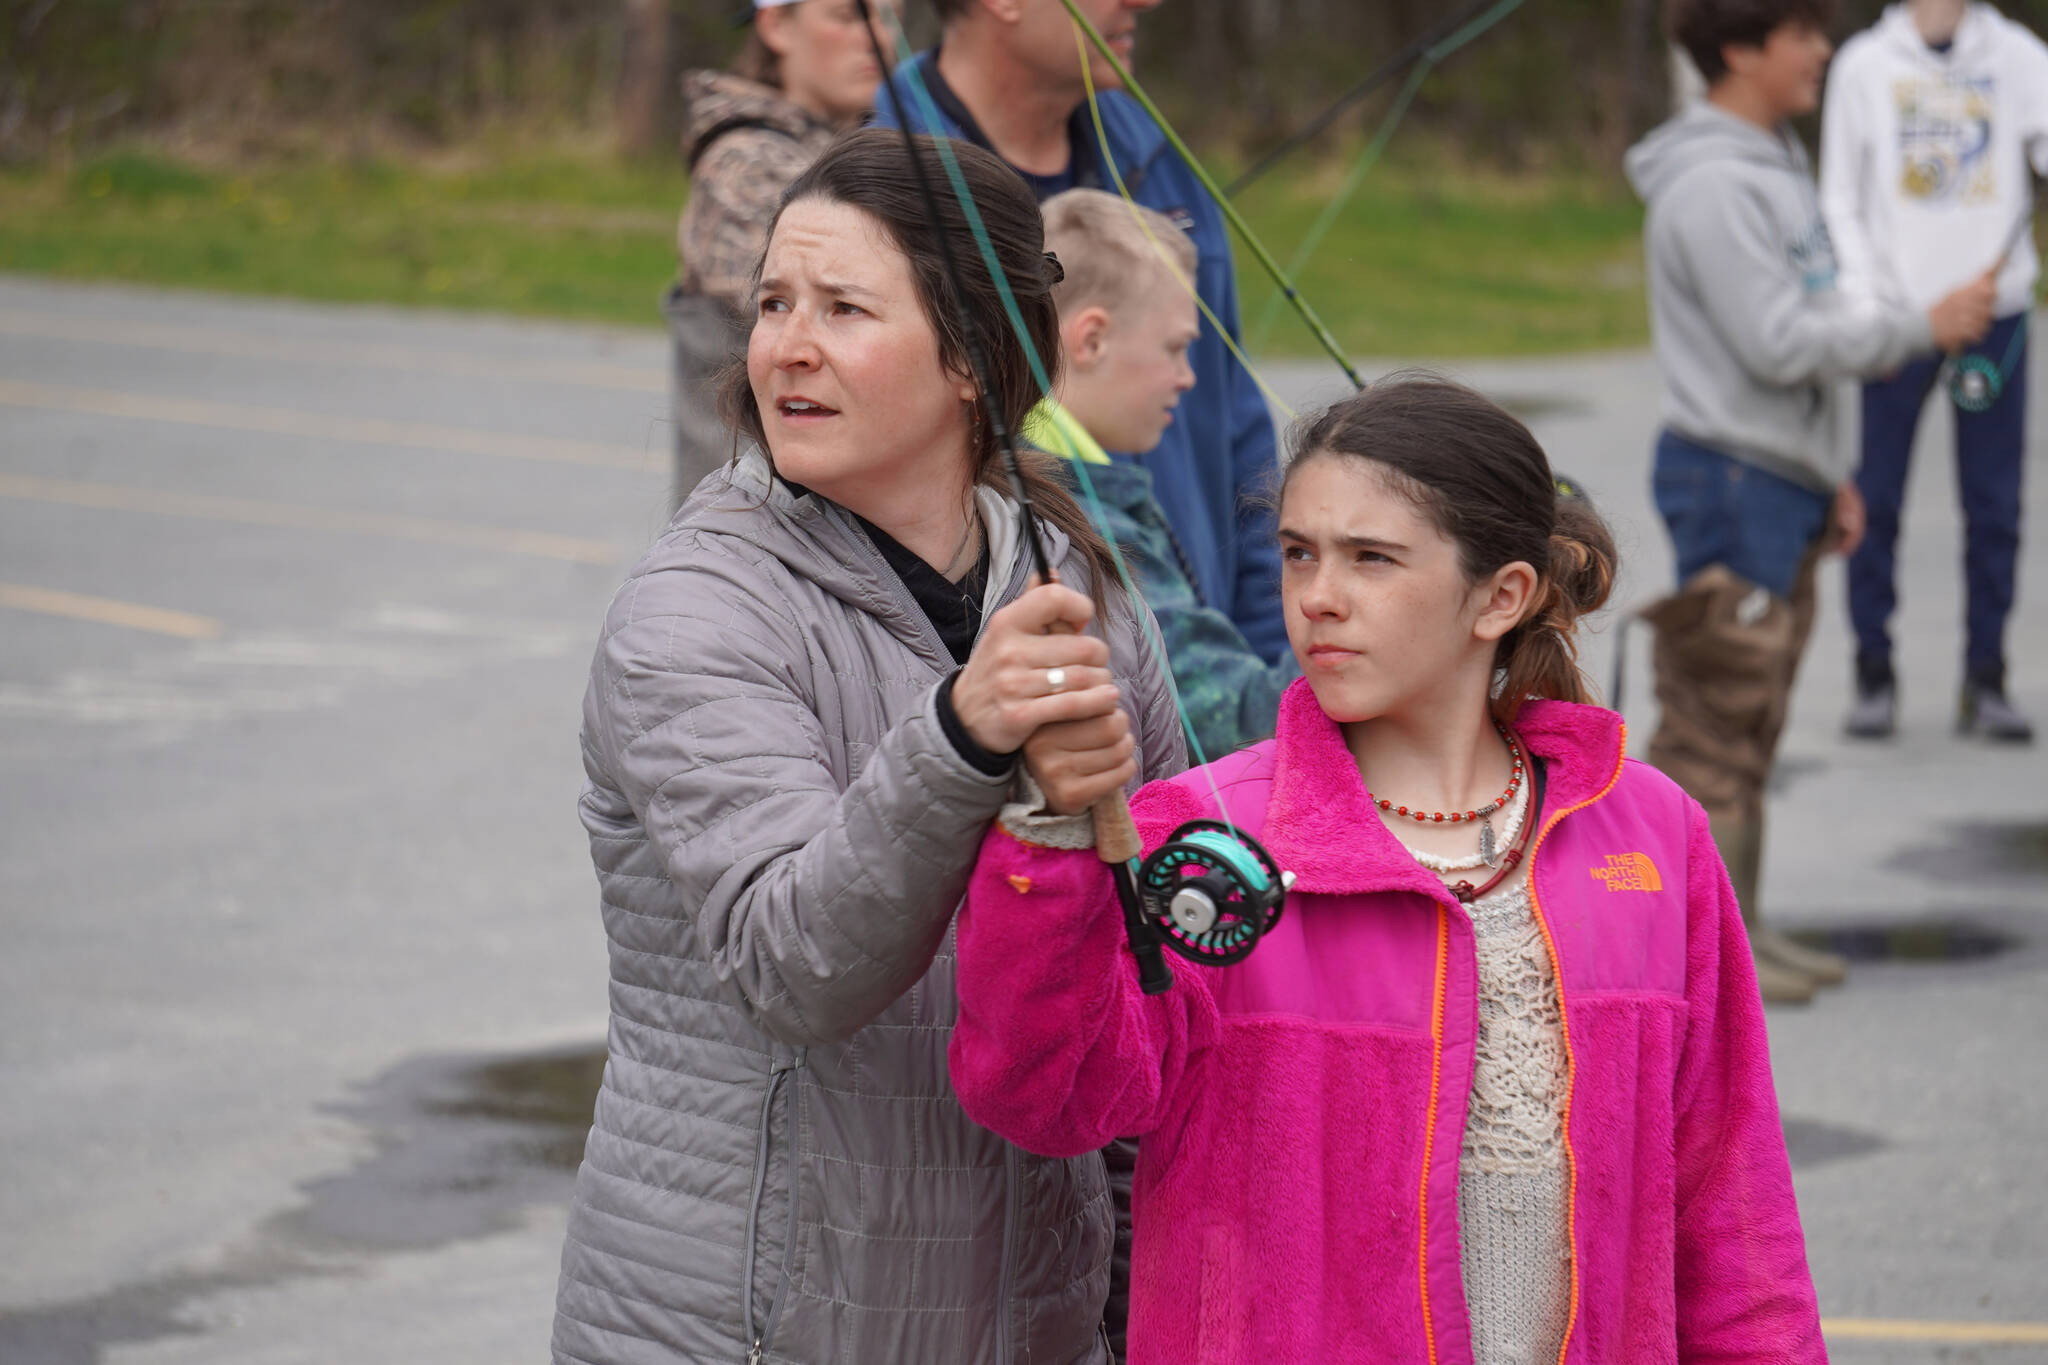 Alexa Millward helps Aviana Stroh with her fly cast during a kids camp put on by Trout Unlimited on Wednesday, May 24, 2023, at the Donald E. Gilman Kenai River Center in Soldotna, Alaska. (Jake Dye/Peninsula Clarion)